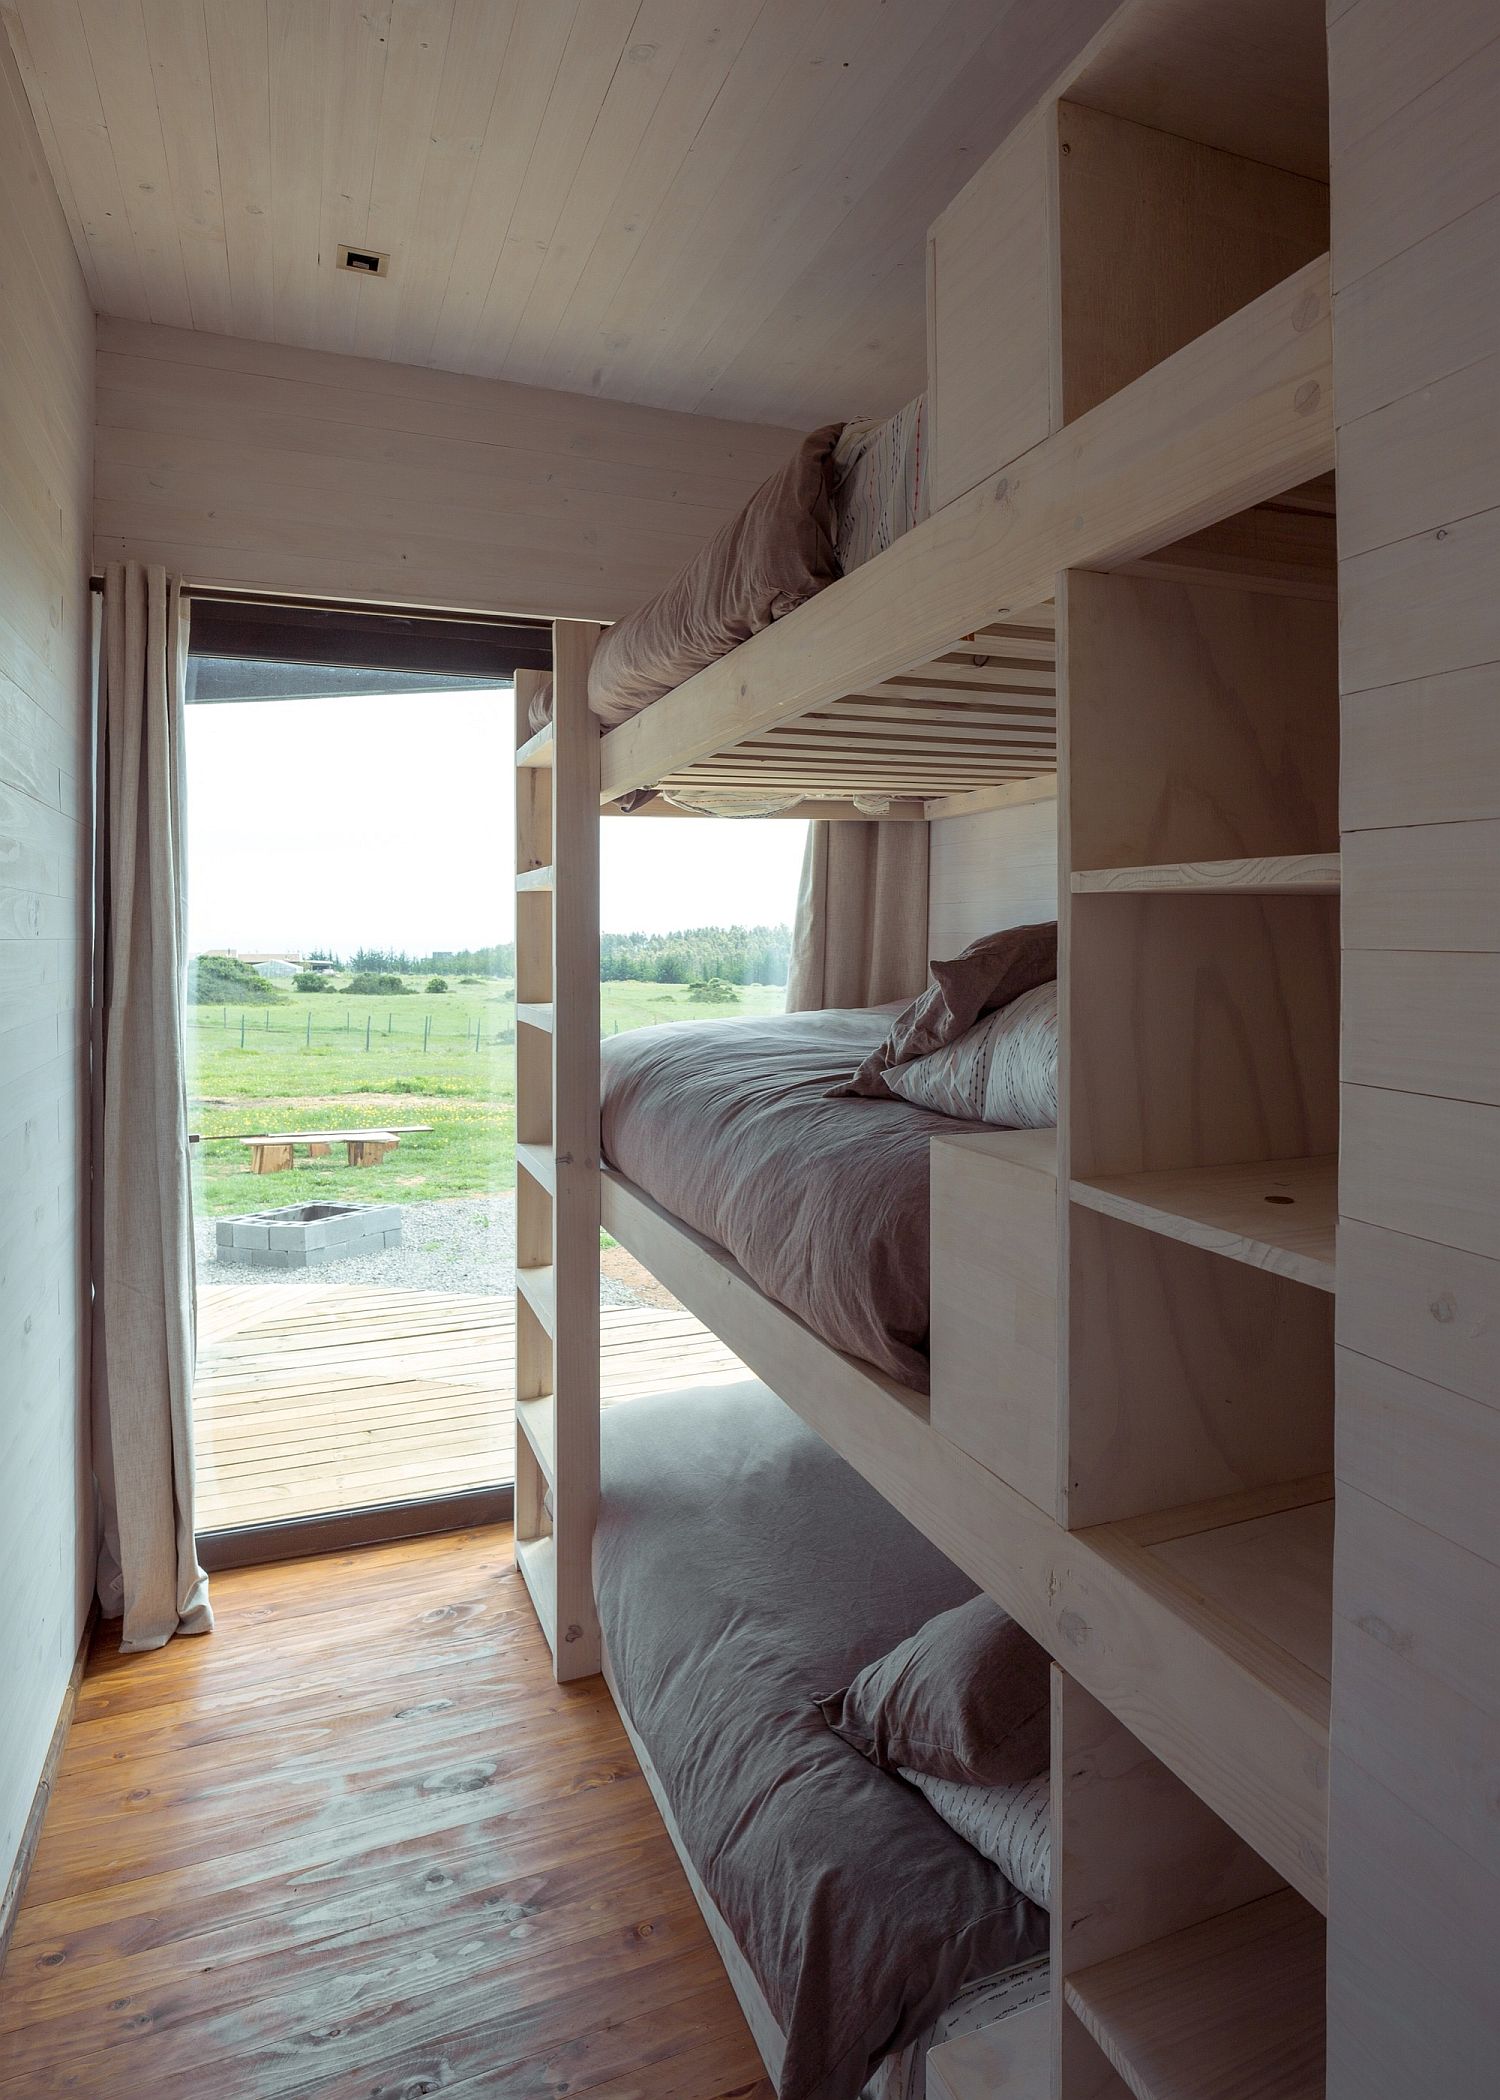 Bunk beds of the kids' bedroom with a view of the distant ocean